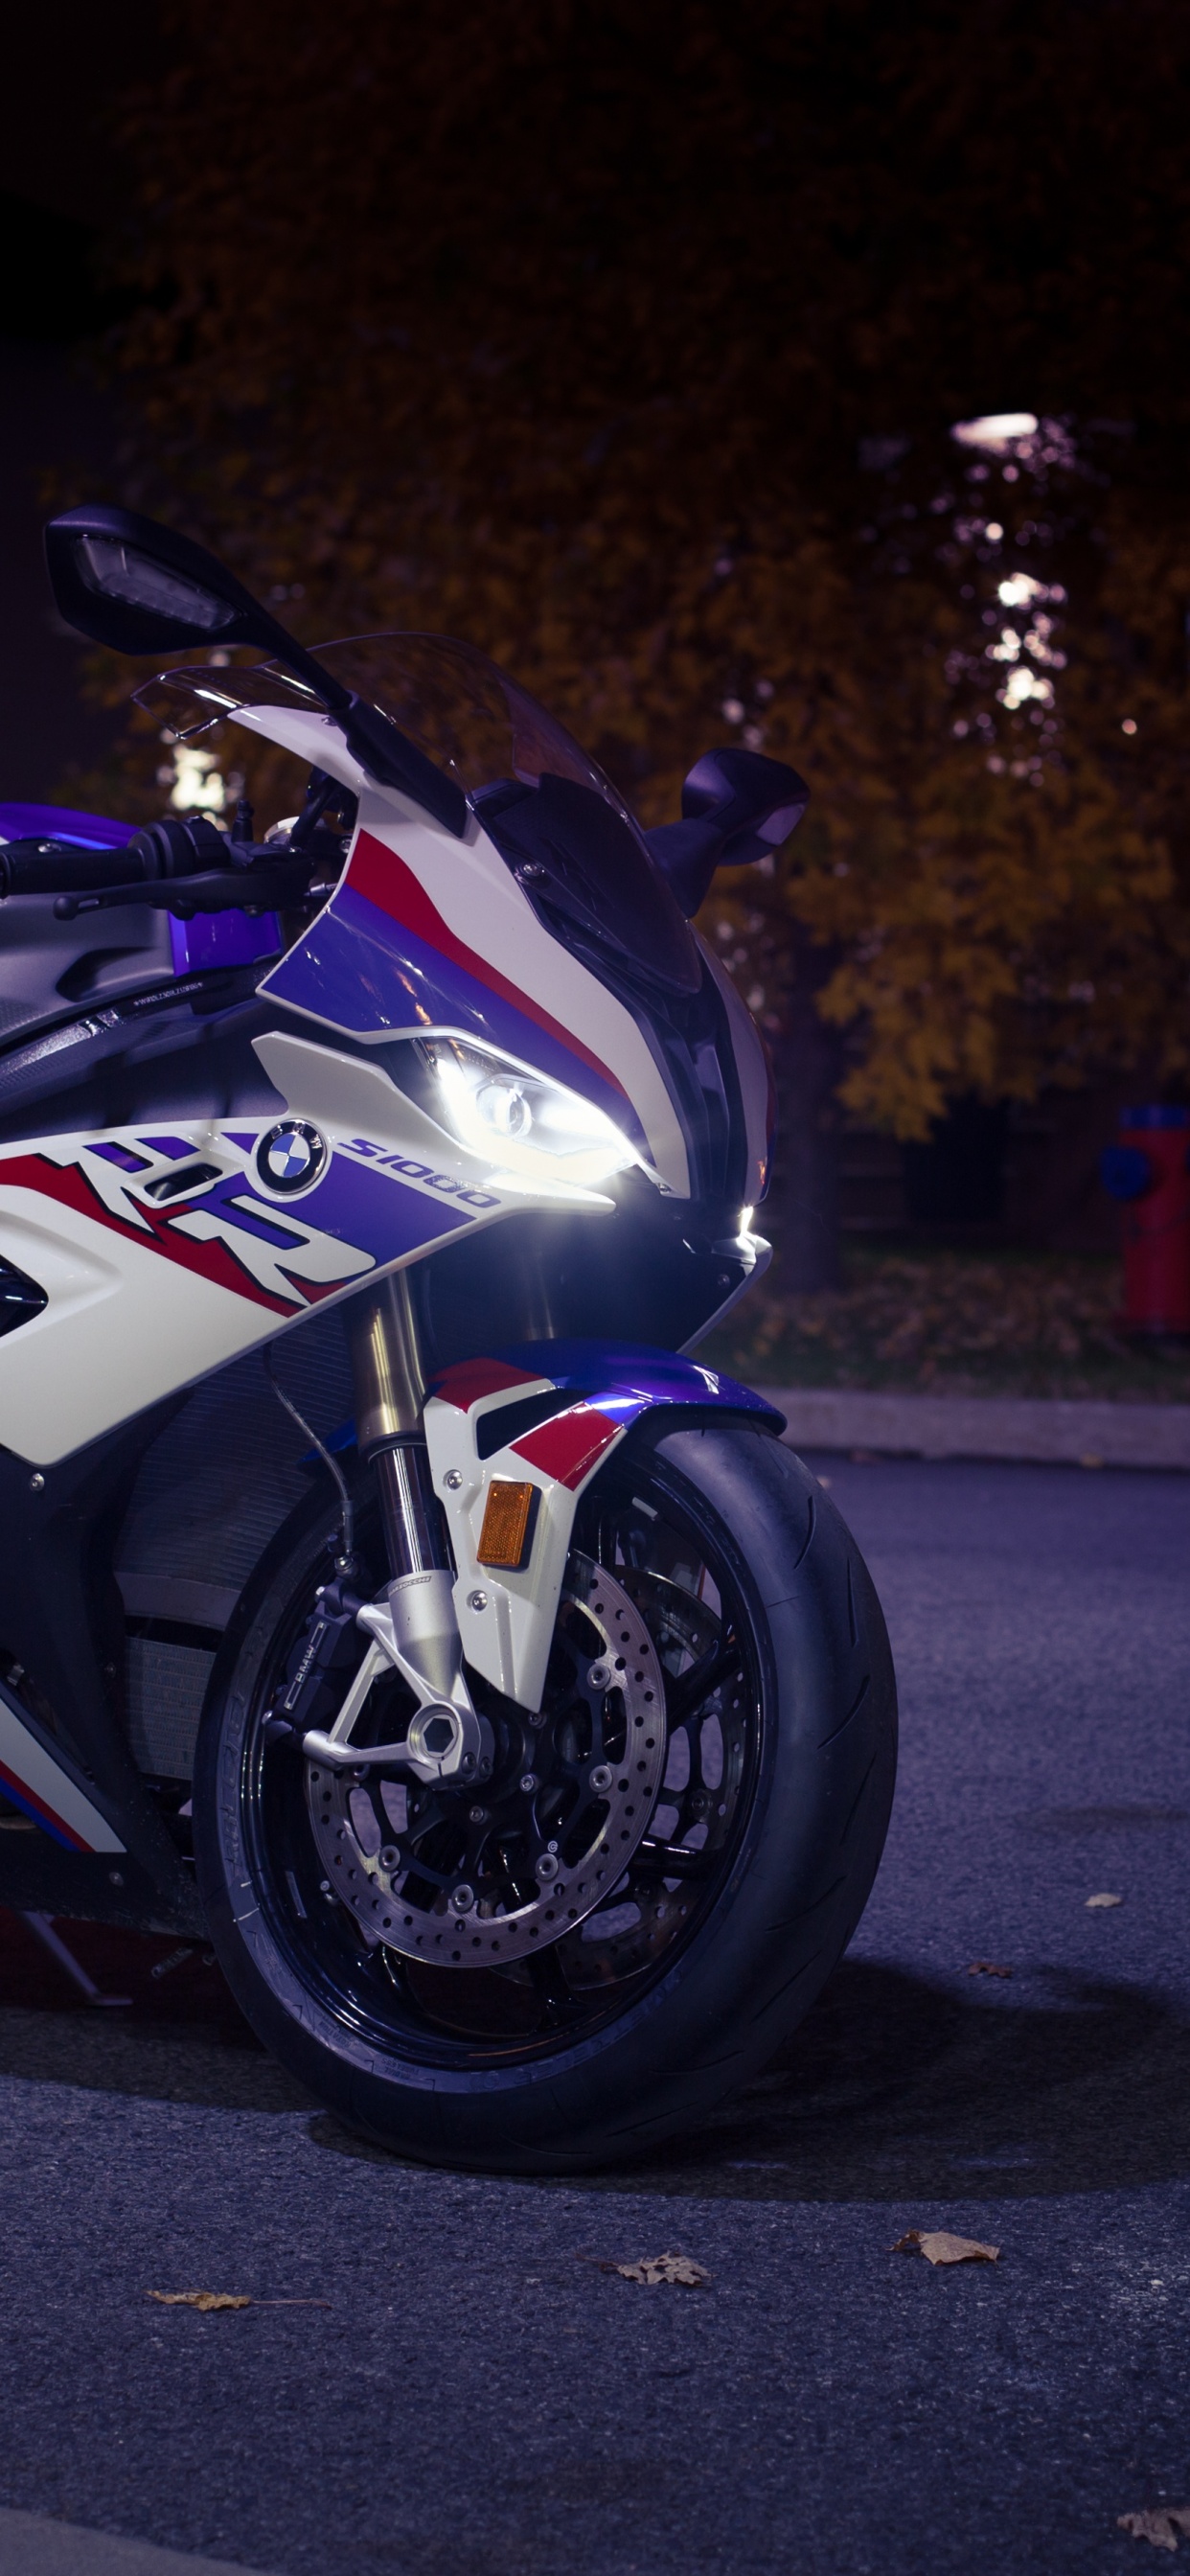 BMW S1000RR iPhone Wallpapers Top 25 Best BMW S1000RR iPhone Wallpapers   Getty Wallpapers